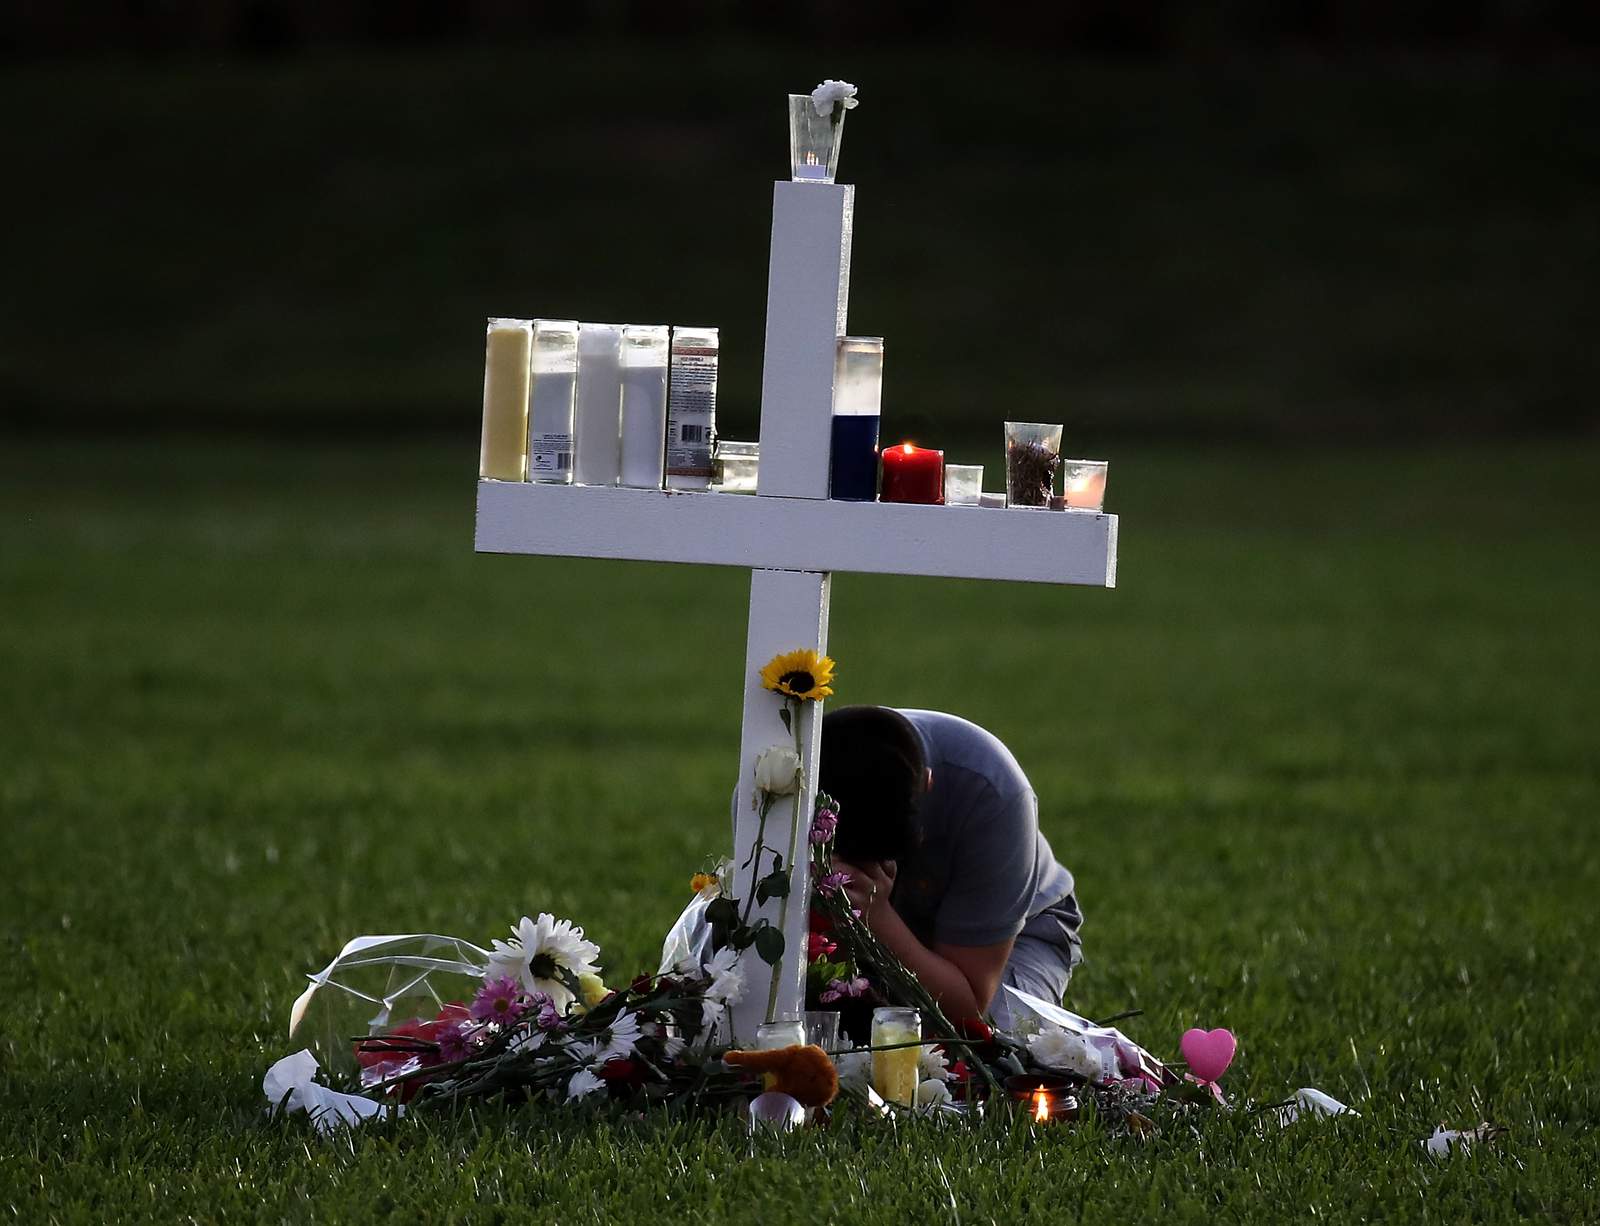 Never forgotten: 3 years later, remembering the school shooting tragedy in Parkland, in photos